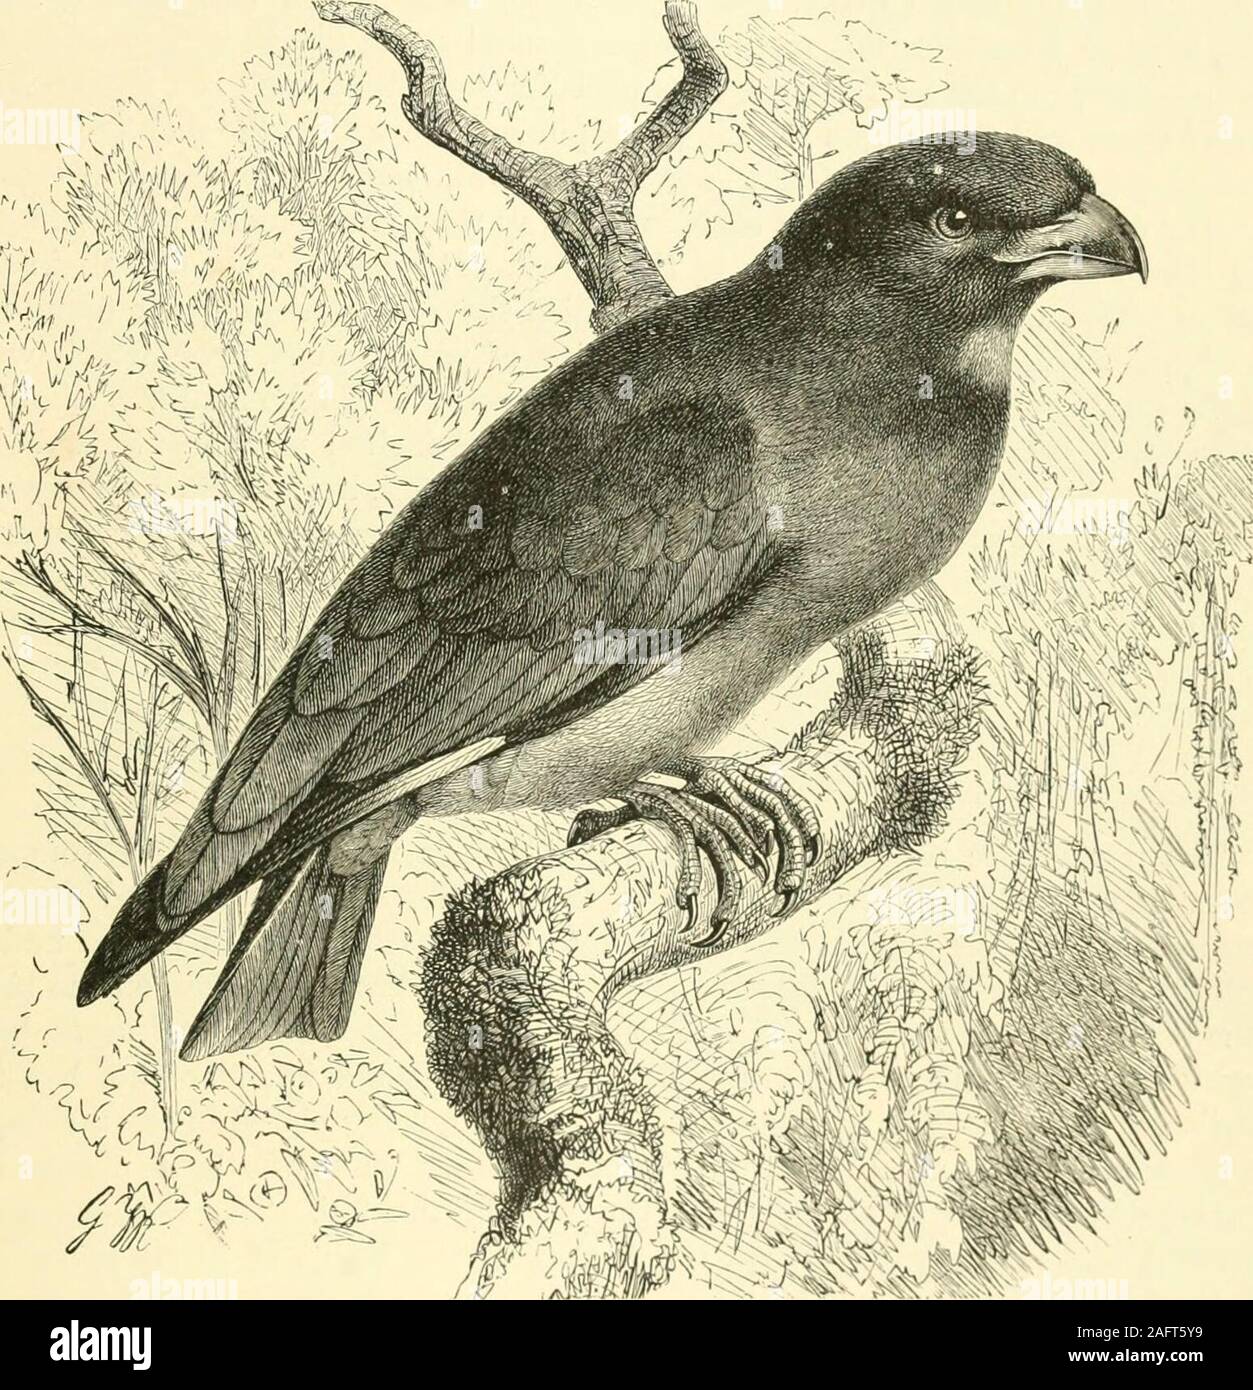 . The royal natural history. rdh, not unlike that which a3^oung jackdaw sometimes utters; this last is their call-note. These notes veryoften vary, and the bird is generally heard before he is seen. In fine weatherthe male rises in the air near where the female is incubating, uttering a singlerack, rack-rack, etc., until he attains a considerable height, from which he suddenlyfalls, always turning a somersault, and throwing himself here and there in the ROLLERS. 8i air, uttering quickly the following Tdh-rdrdh-rrdh-rrd, etc. etc., which he alwayschanges to the rack as soon as ever he begins to Stock Photo